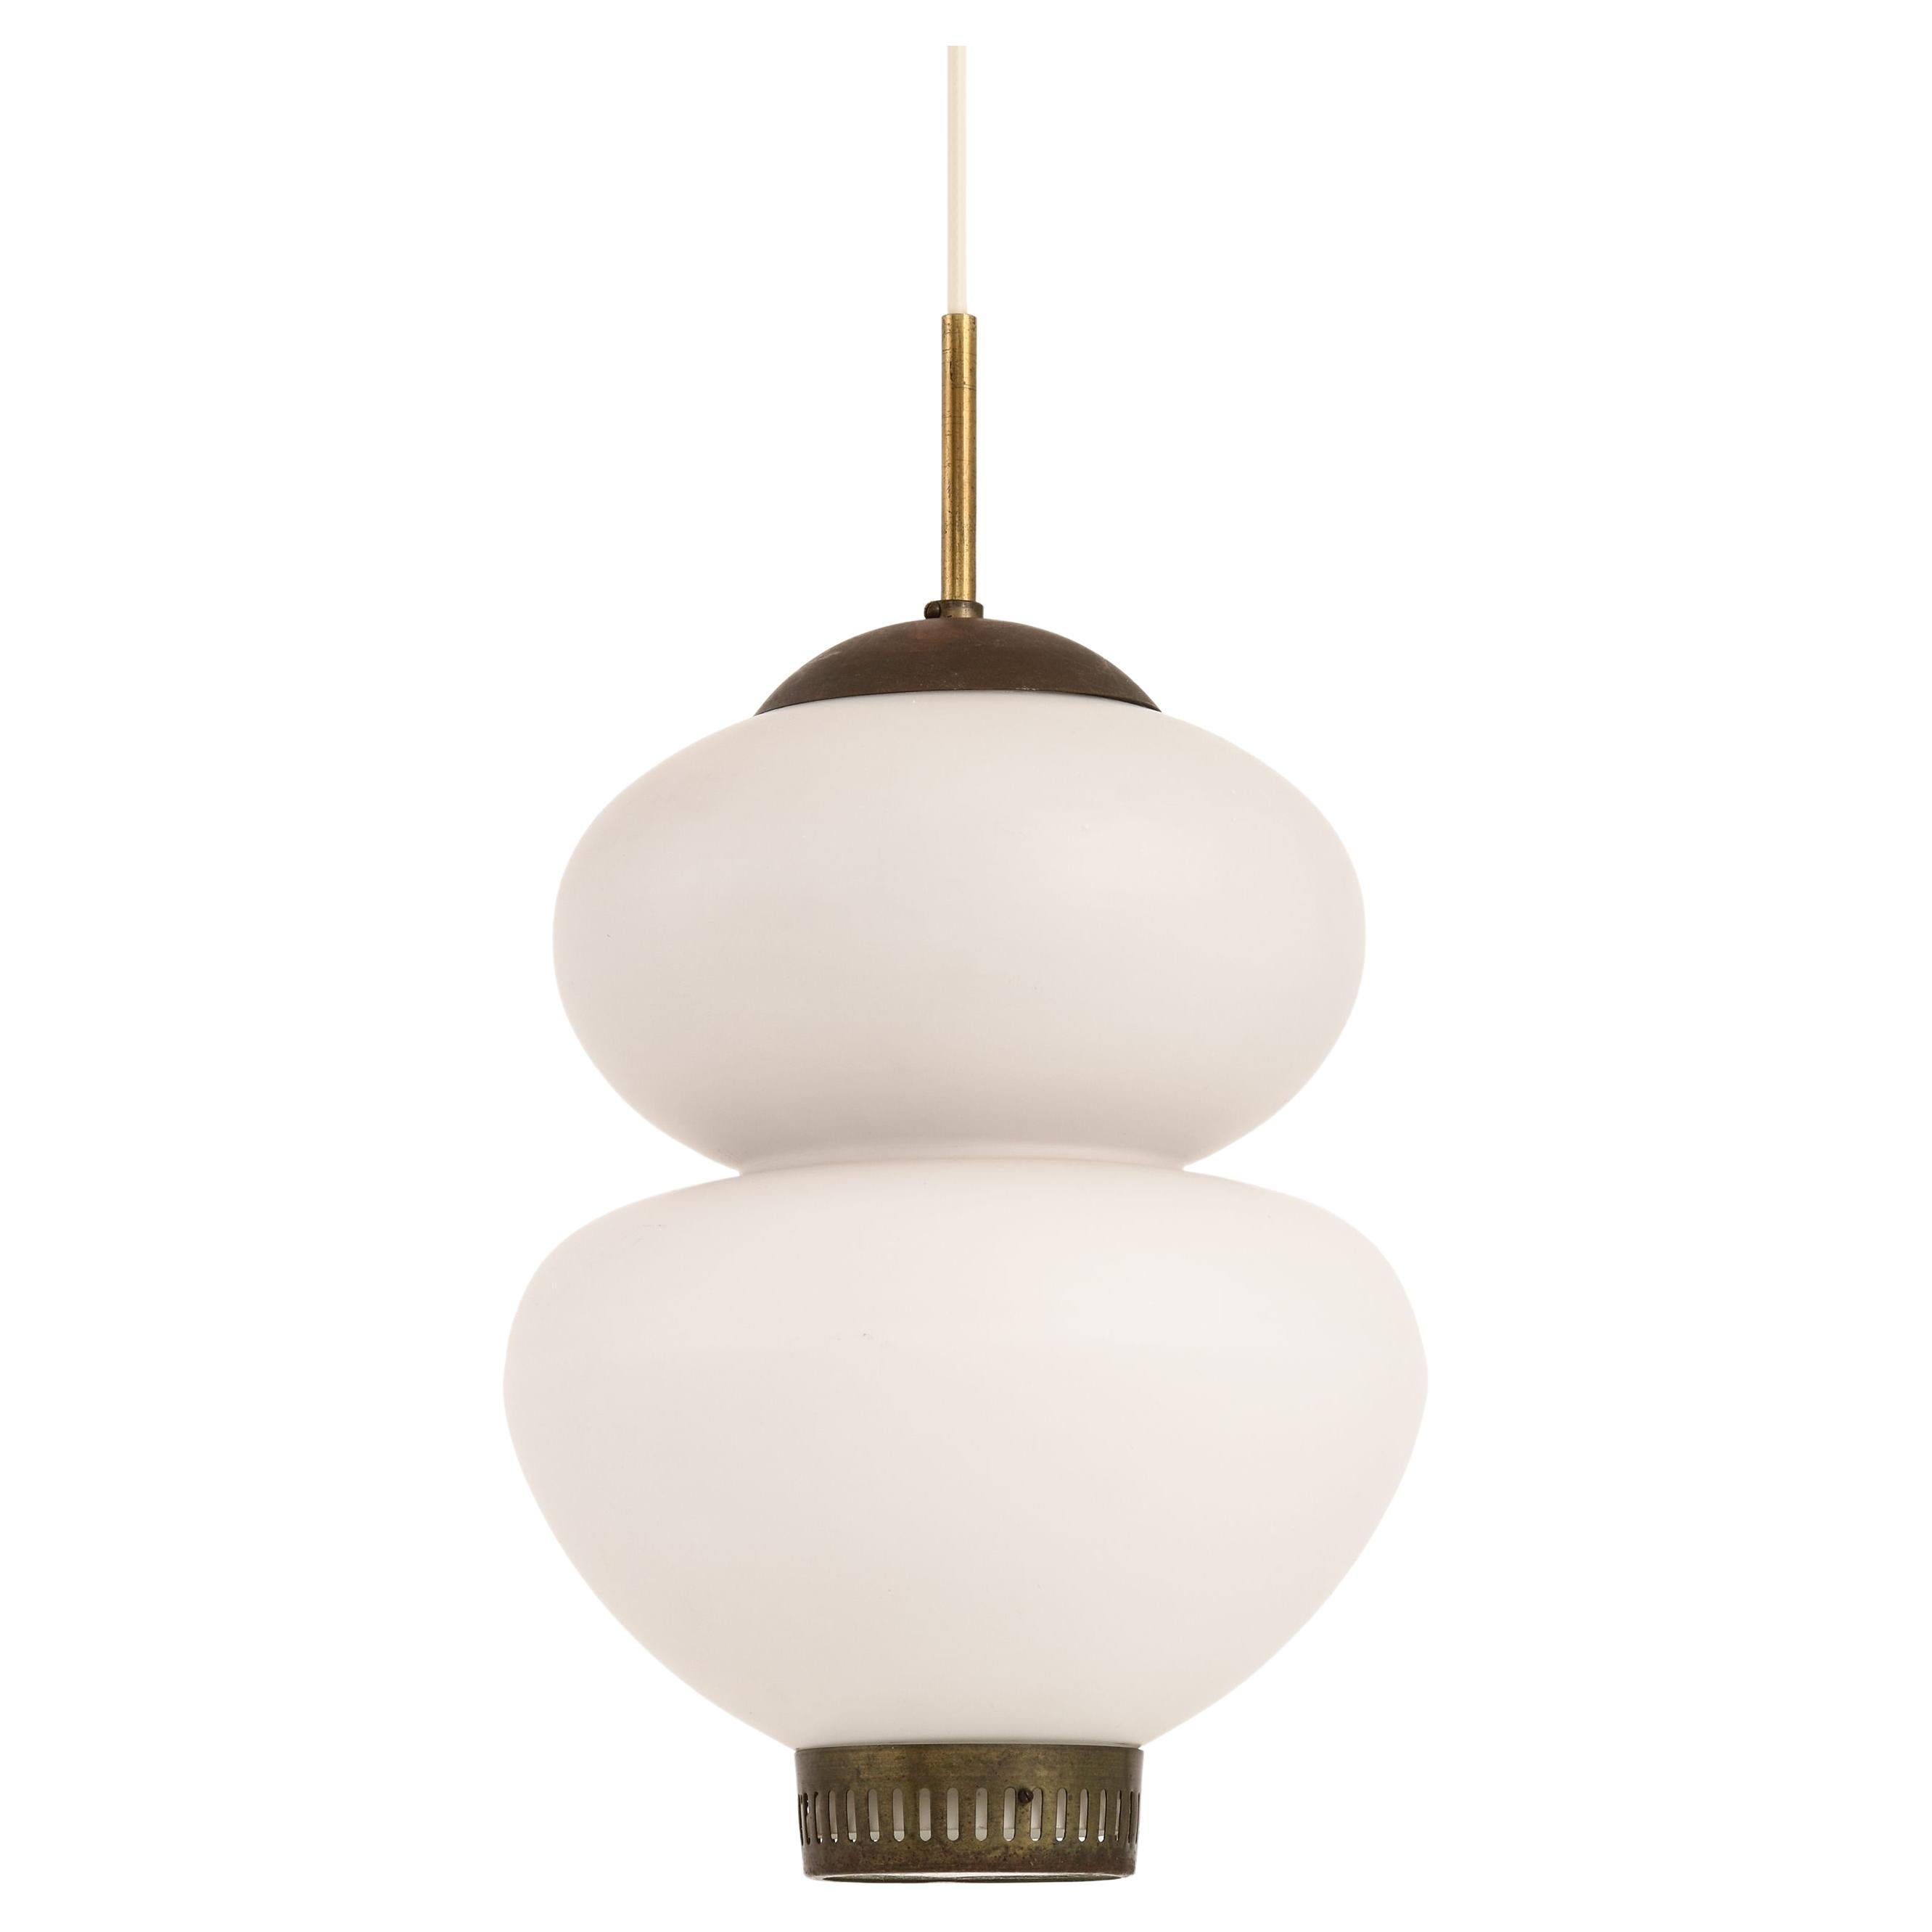 Ceiling Lamp in Brass and Opaline Glass by Bent Karlby, 1950's For Sale